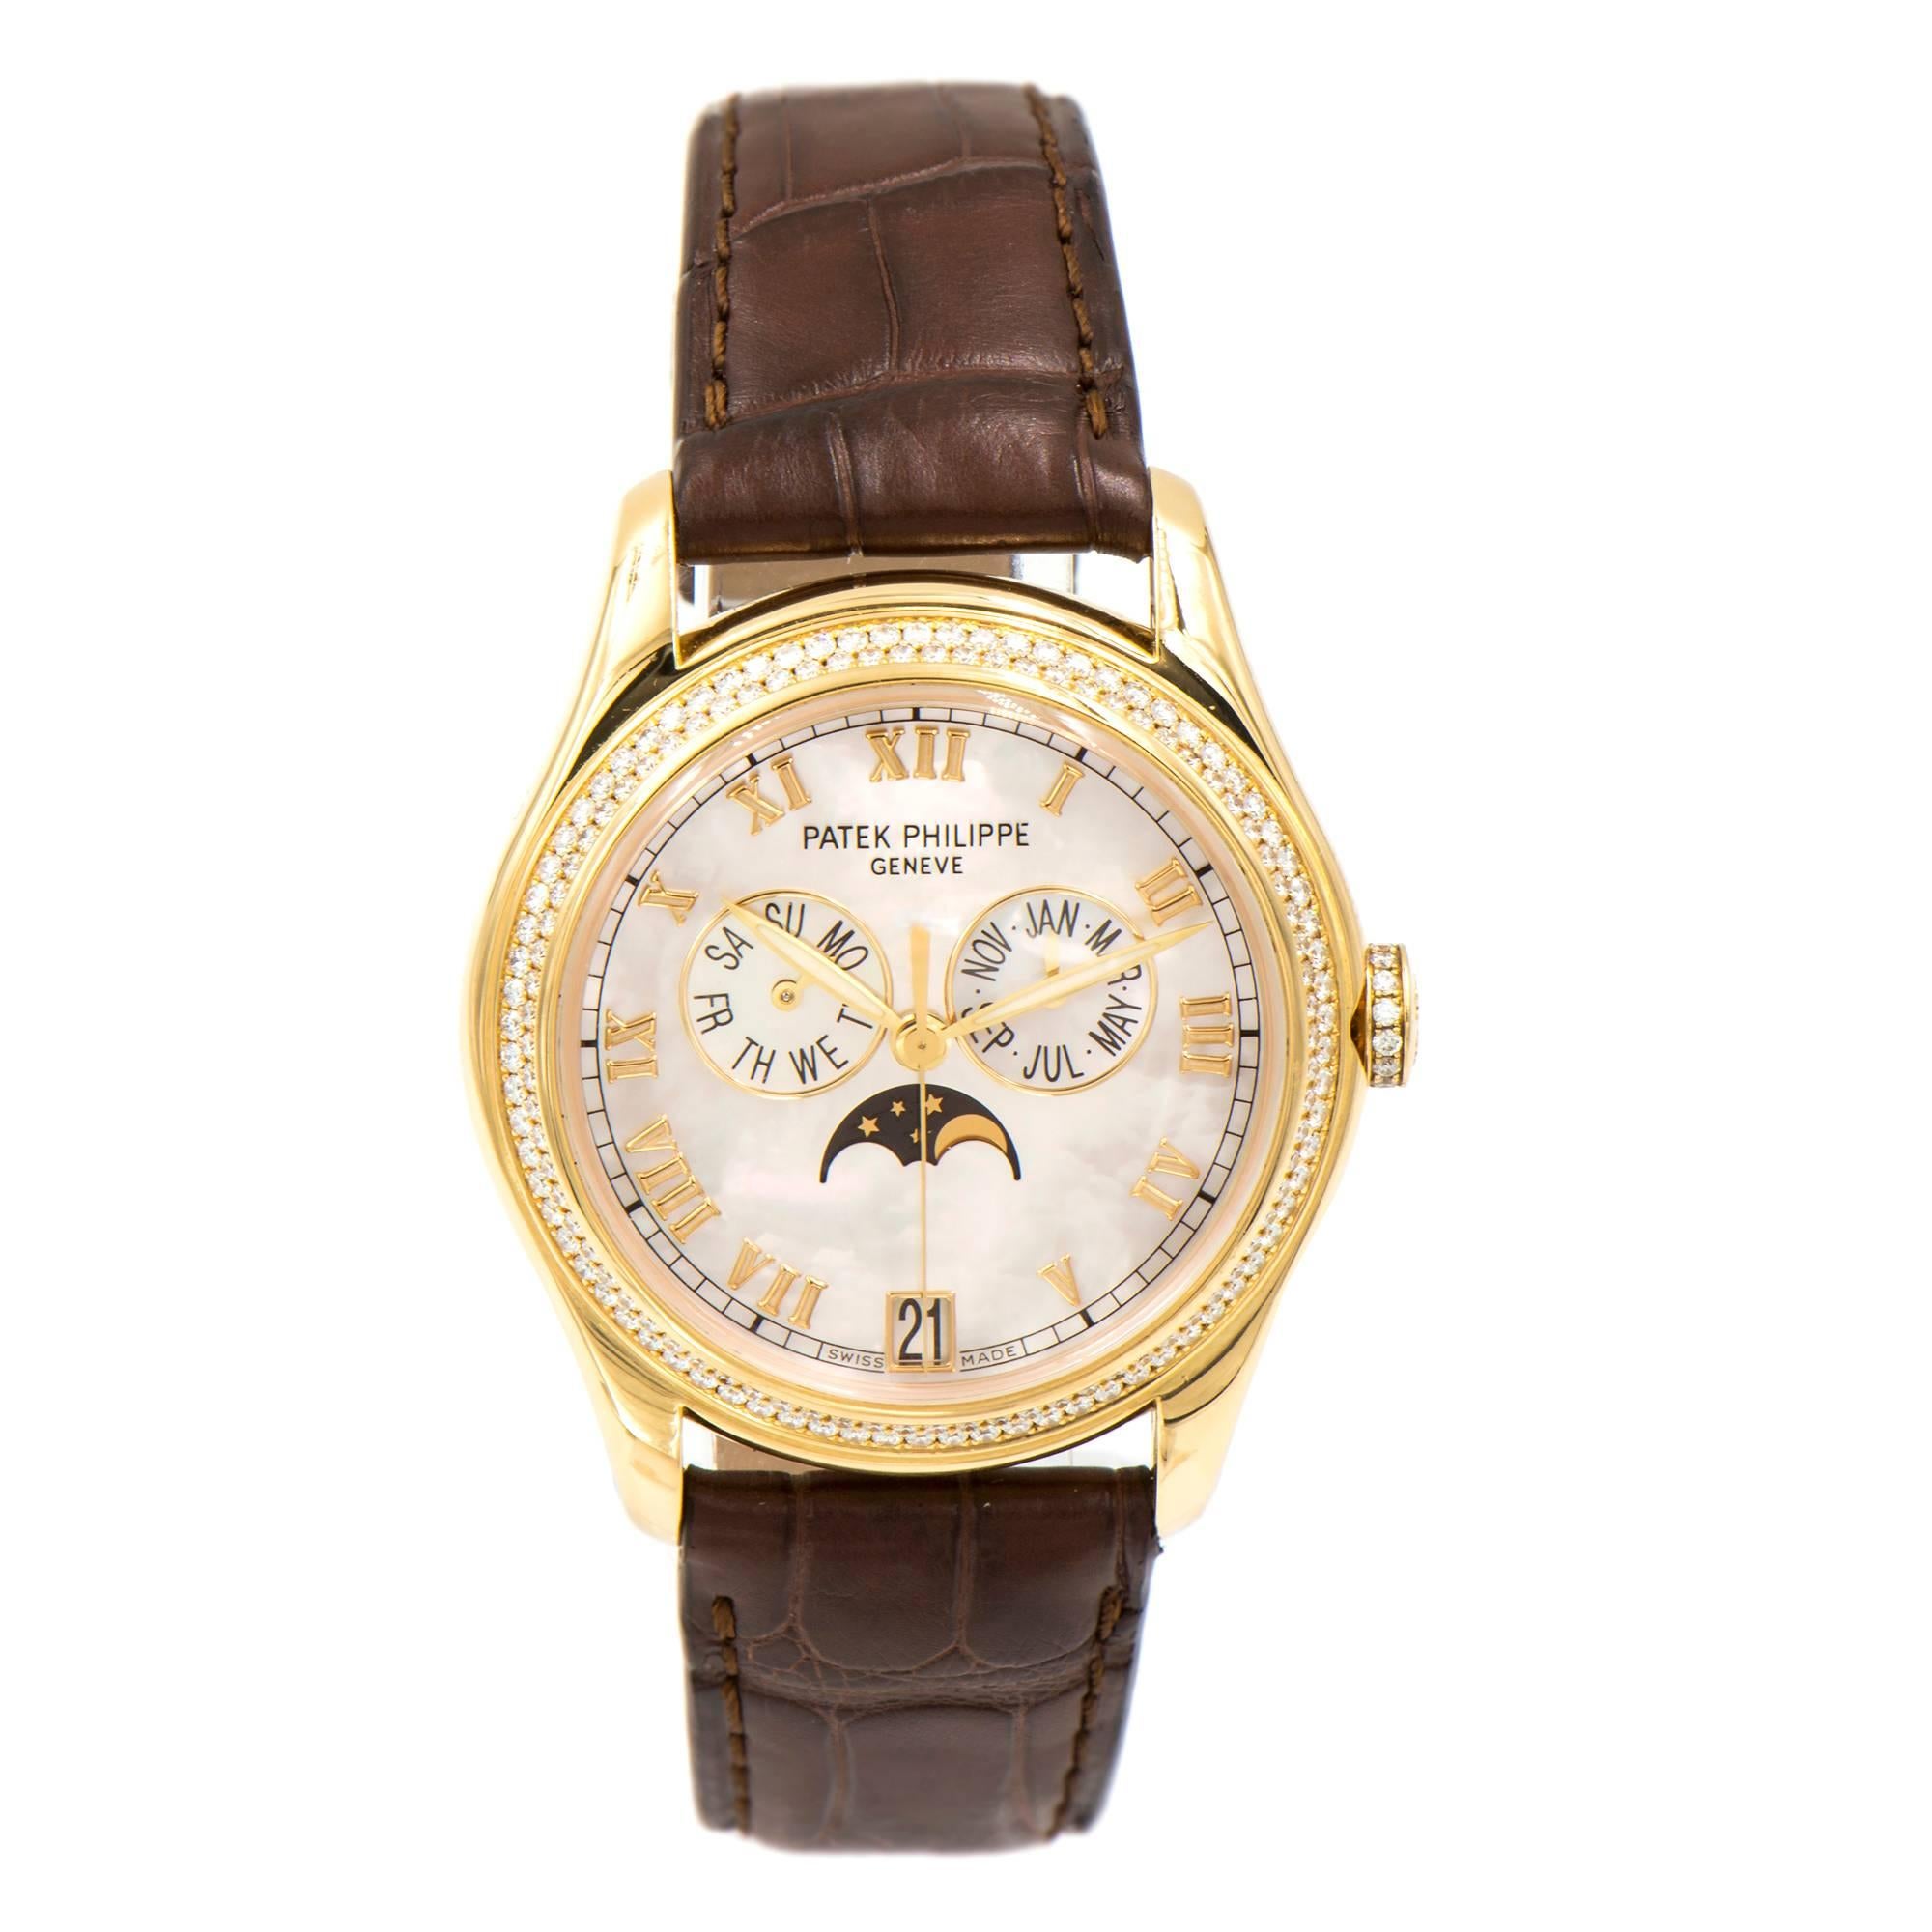 Ladies Patek Philippe diamond wrist watch. Moon phase day date month automatic. Mother of Pearl dial. 18k Yellow gold.  New Patek band. 18k Patek buckle.

Length: 44mm
Width: 37mm
Band with at case: 19.0mm
Case Thickness: 11.3mm
Band: Brand new